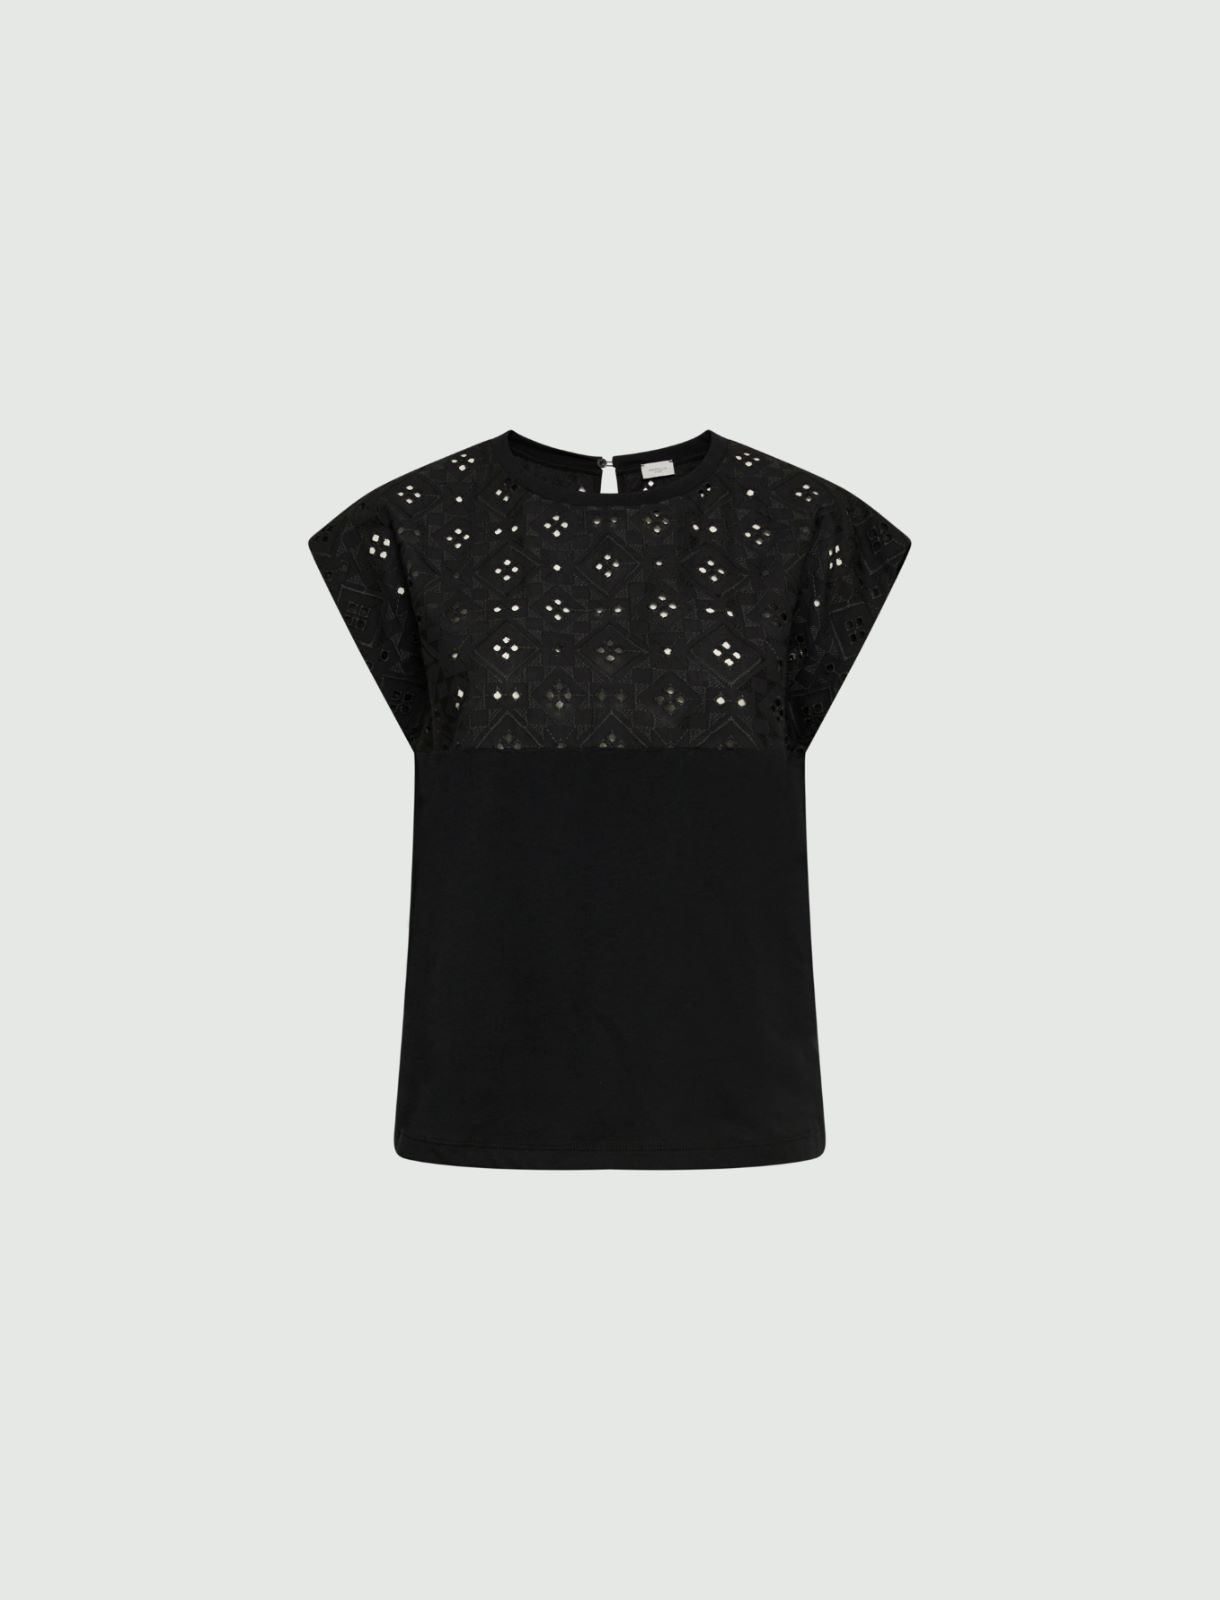 Broderie anglaise T-shirt - Black - Marella - 5